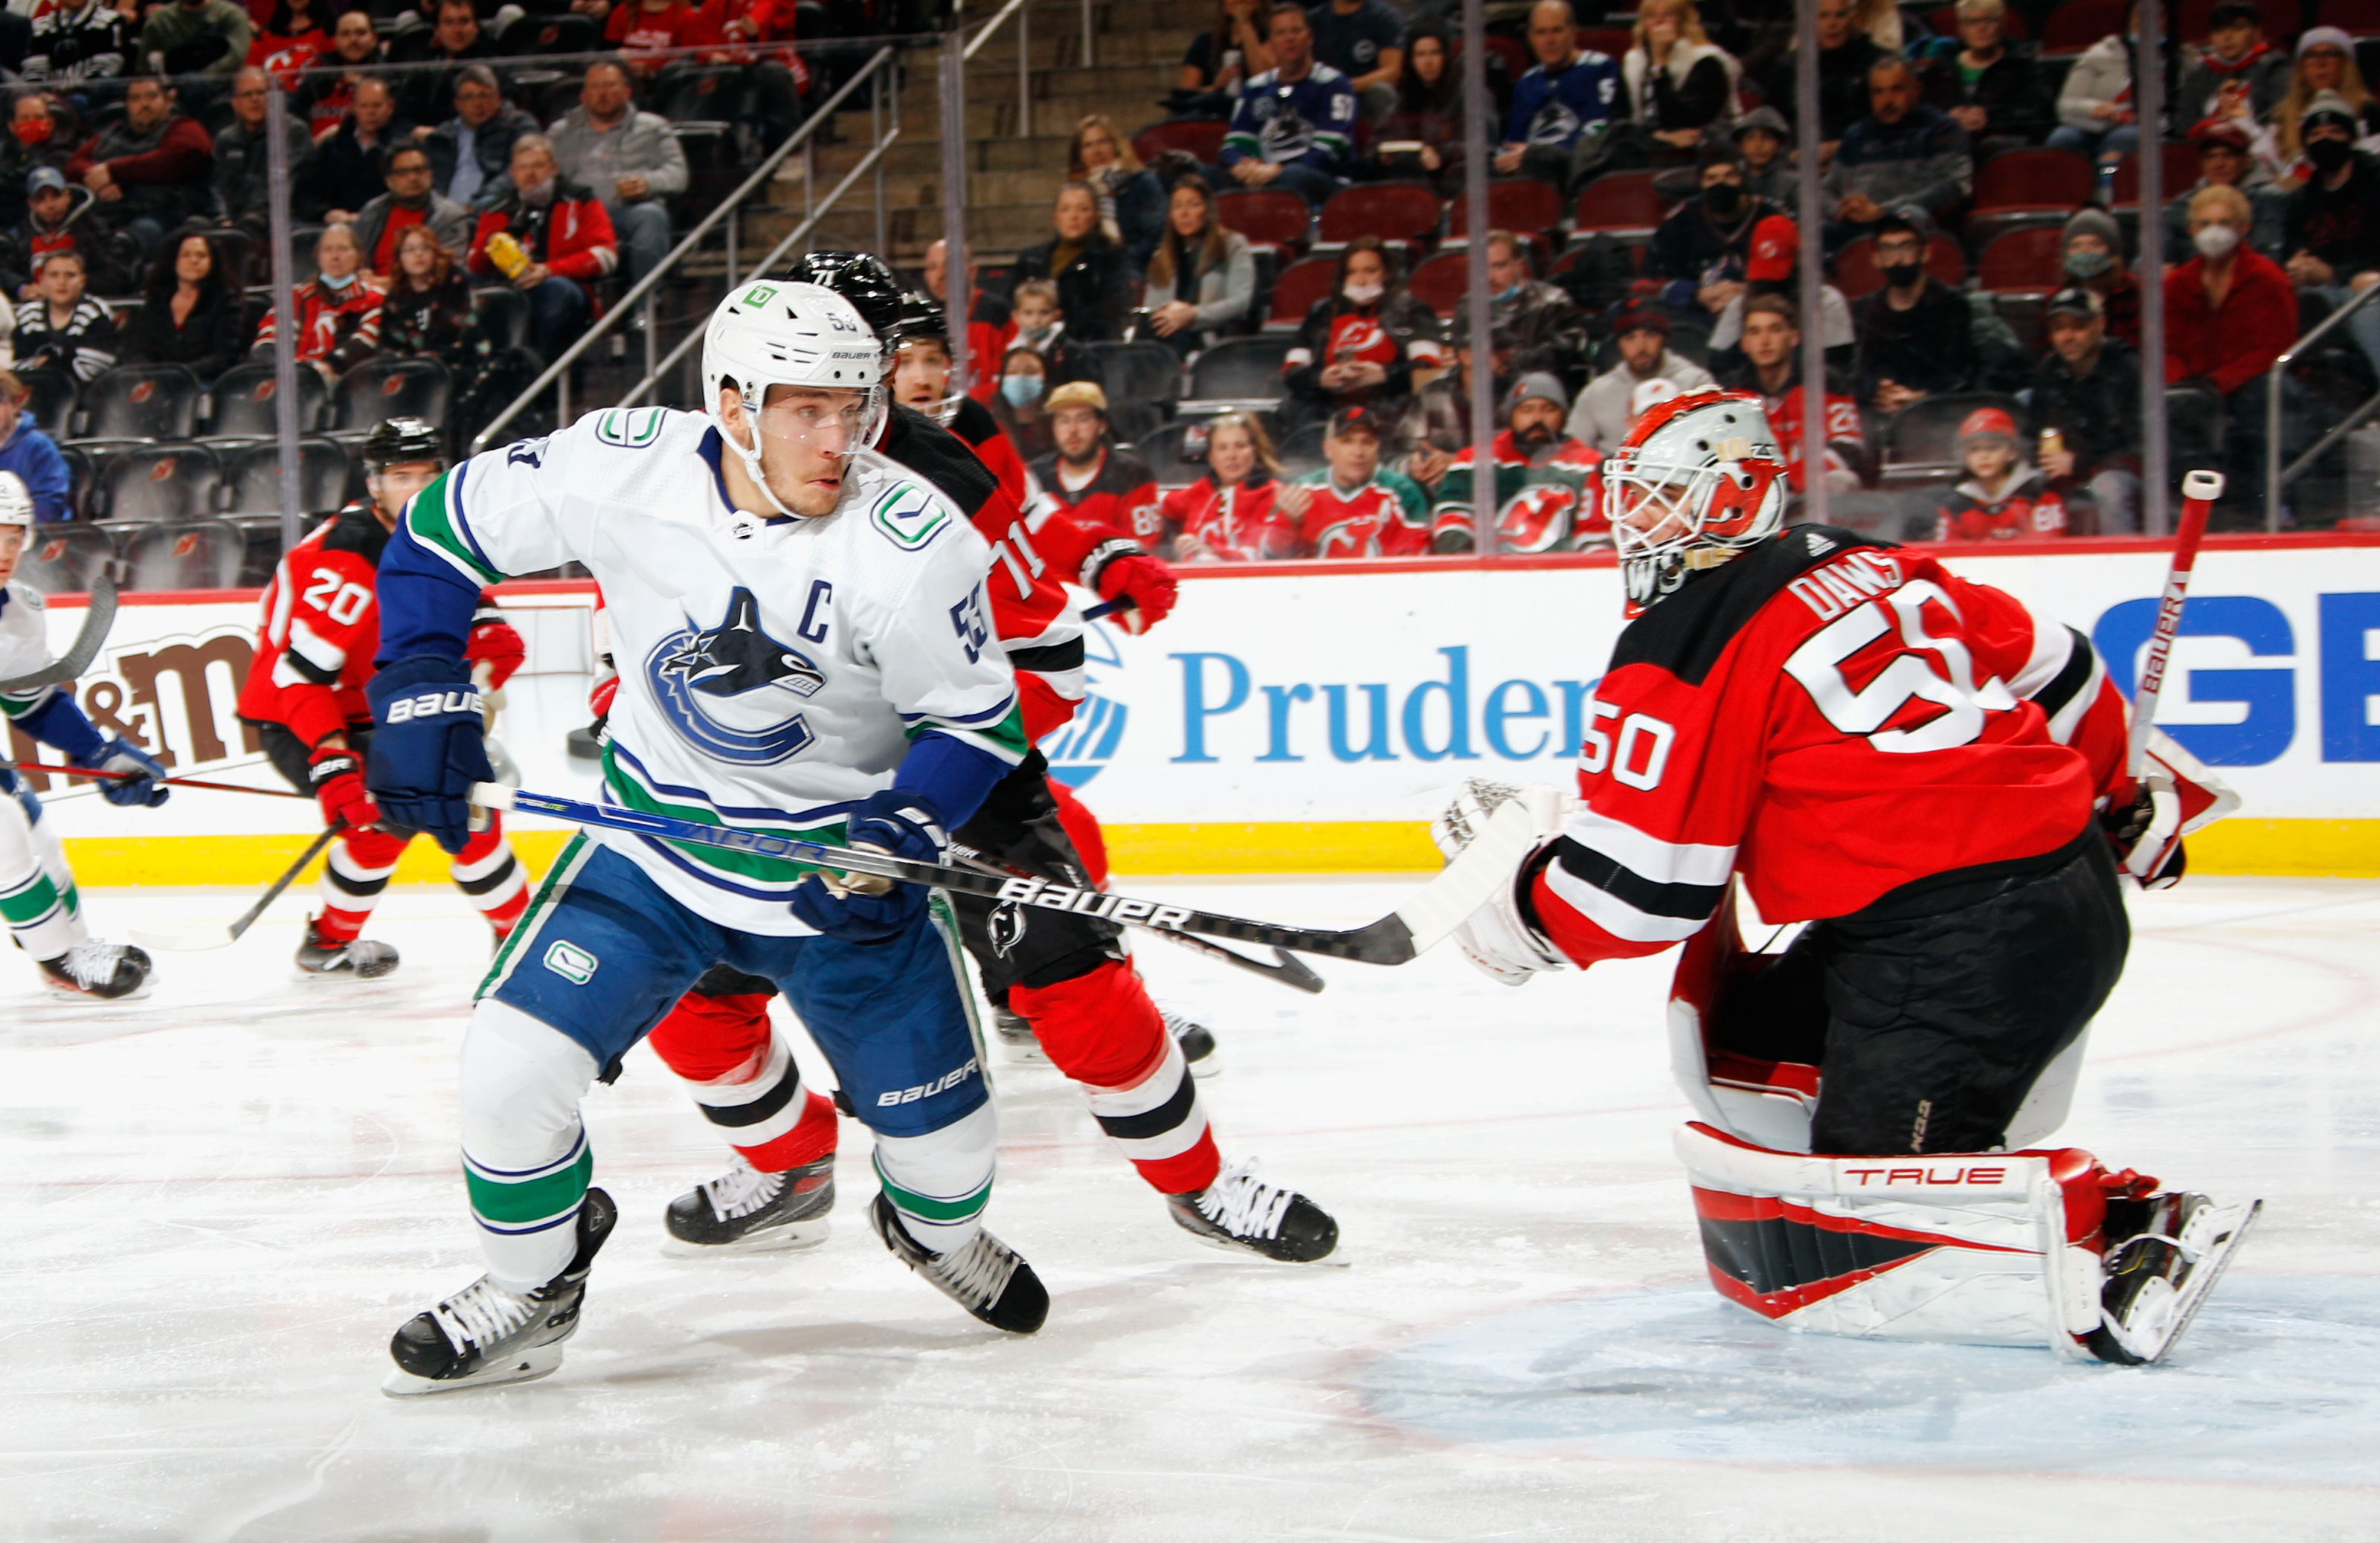 Devils fight back to beat Canucks in shootout 